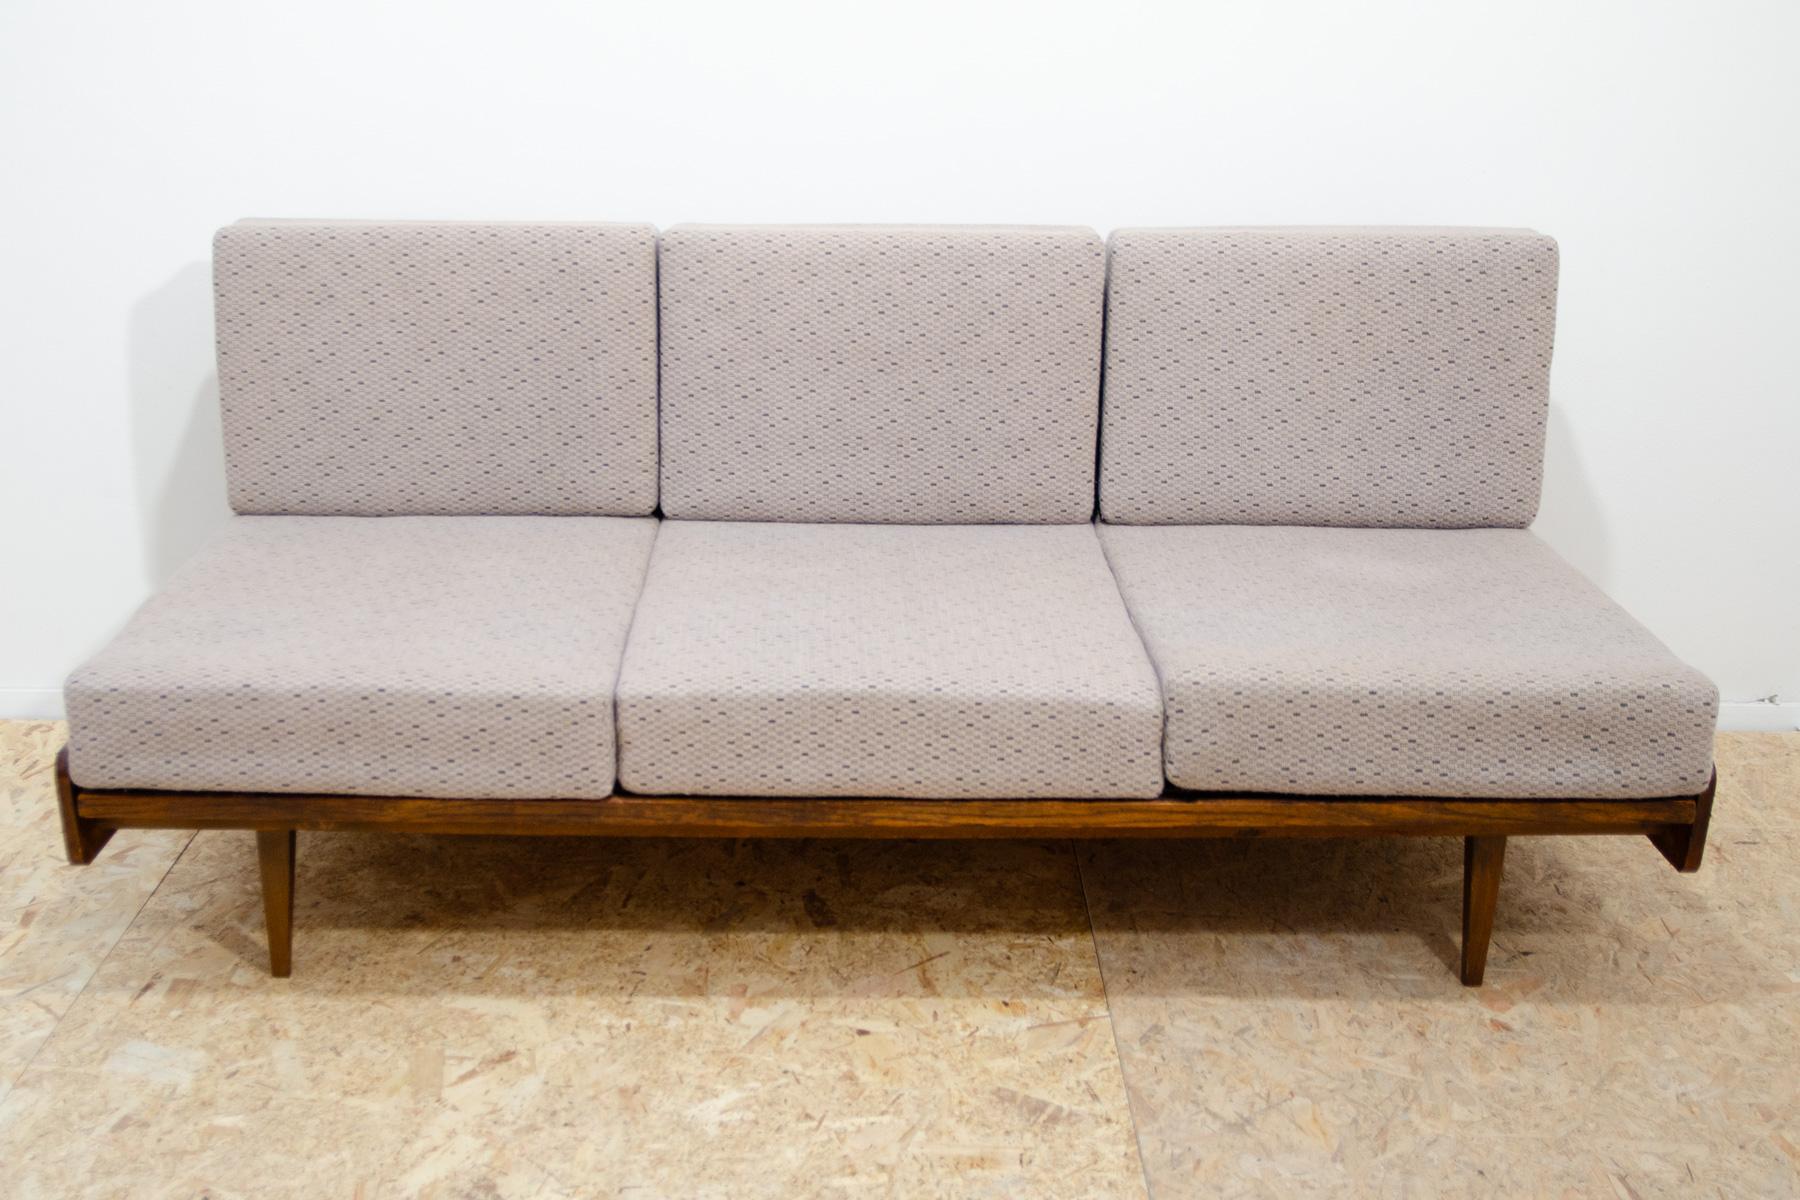 This mid century couch/sofabed was made by Interiér Praha company in the former Czechoslovakia in the 1960´s. The sofa has a pull-out mechanism which you can easily use to fold the sofa into a bed.Material: beech wood, fabric. The sofa is in good